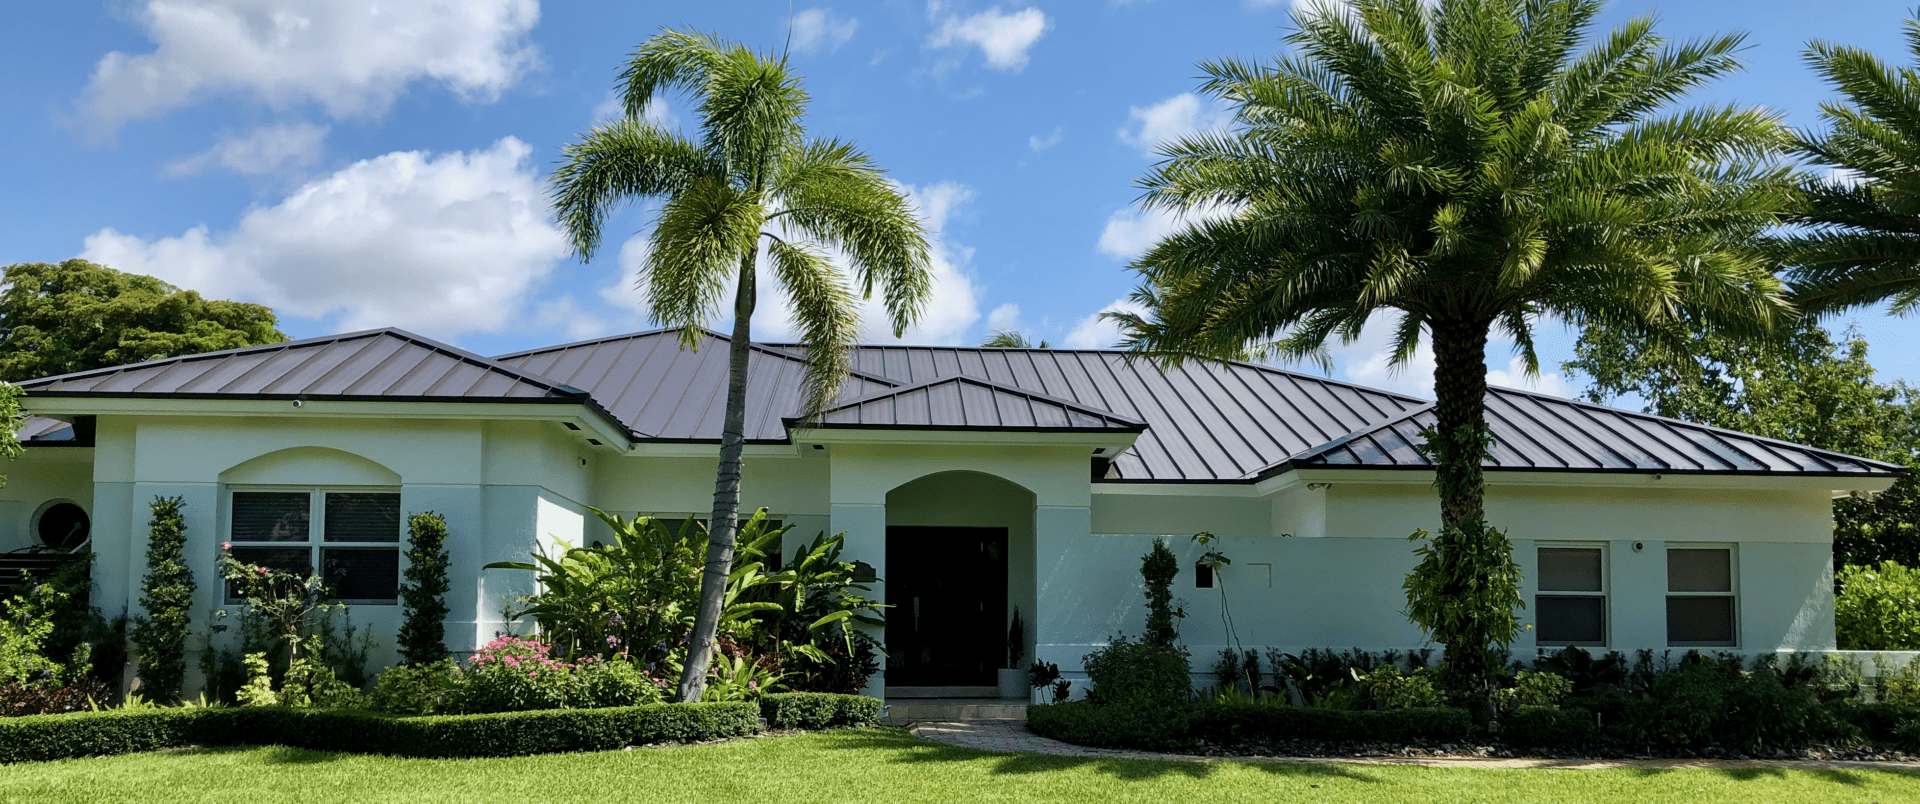 Palm Roofing Corporation